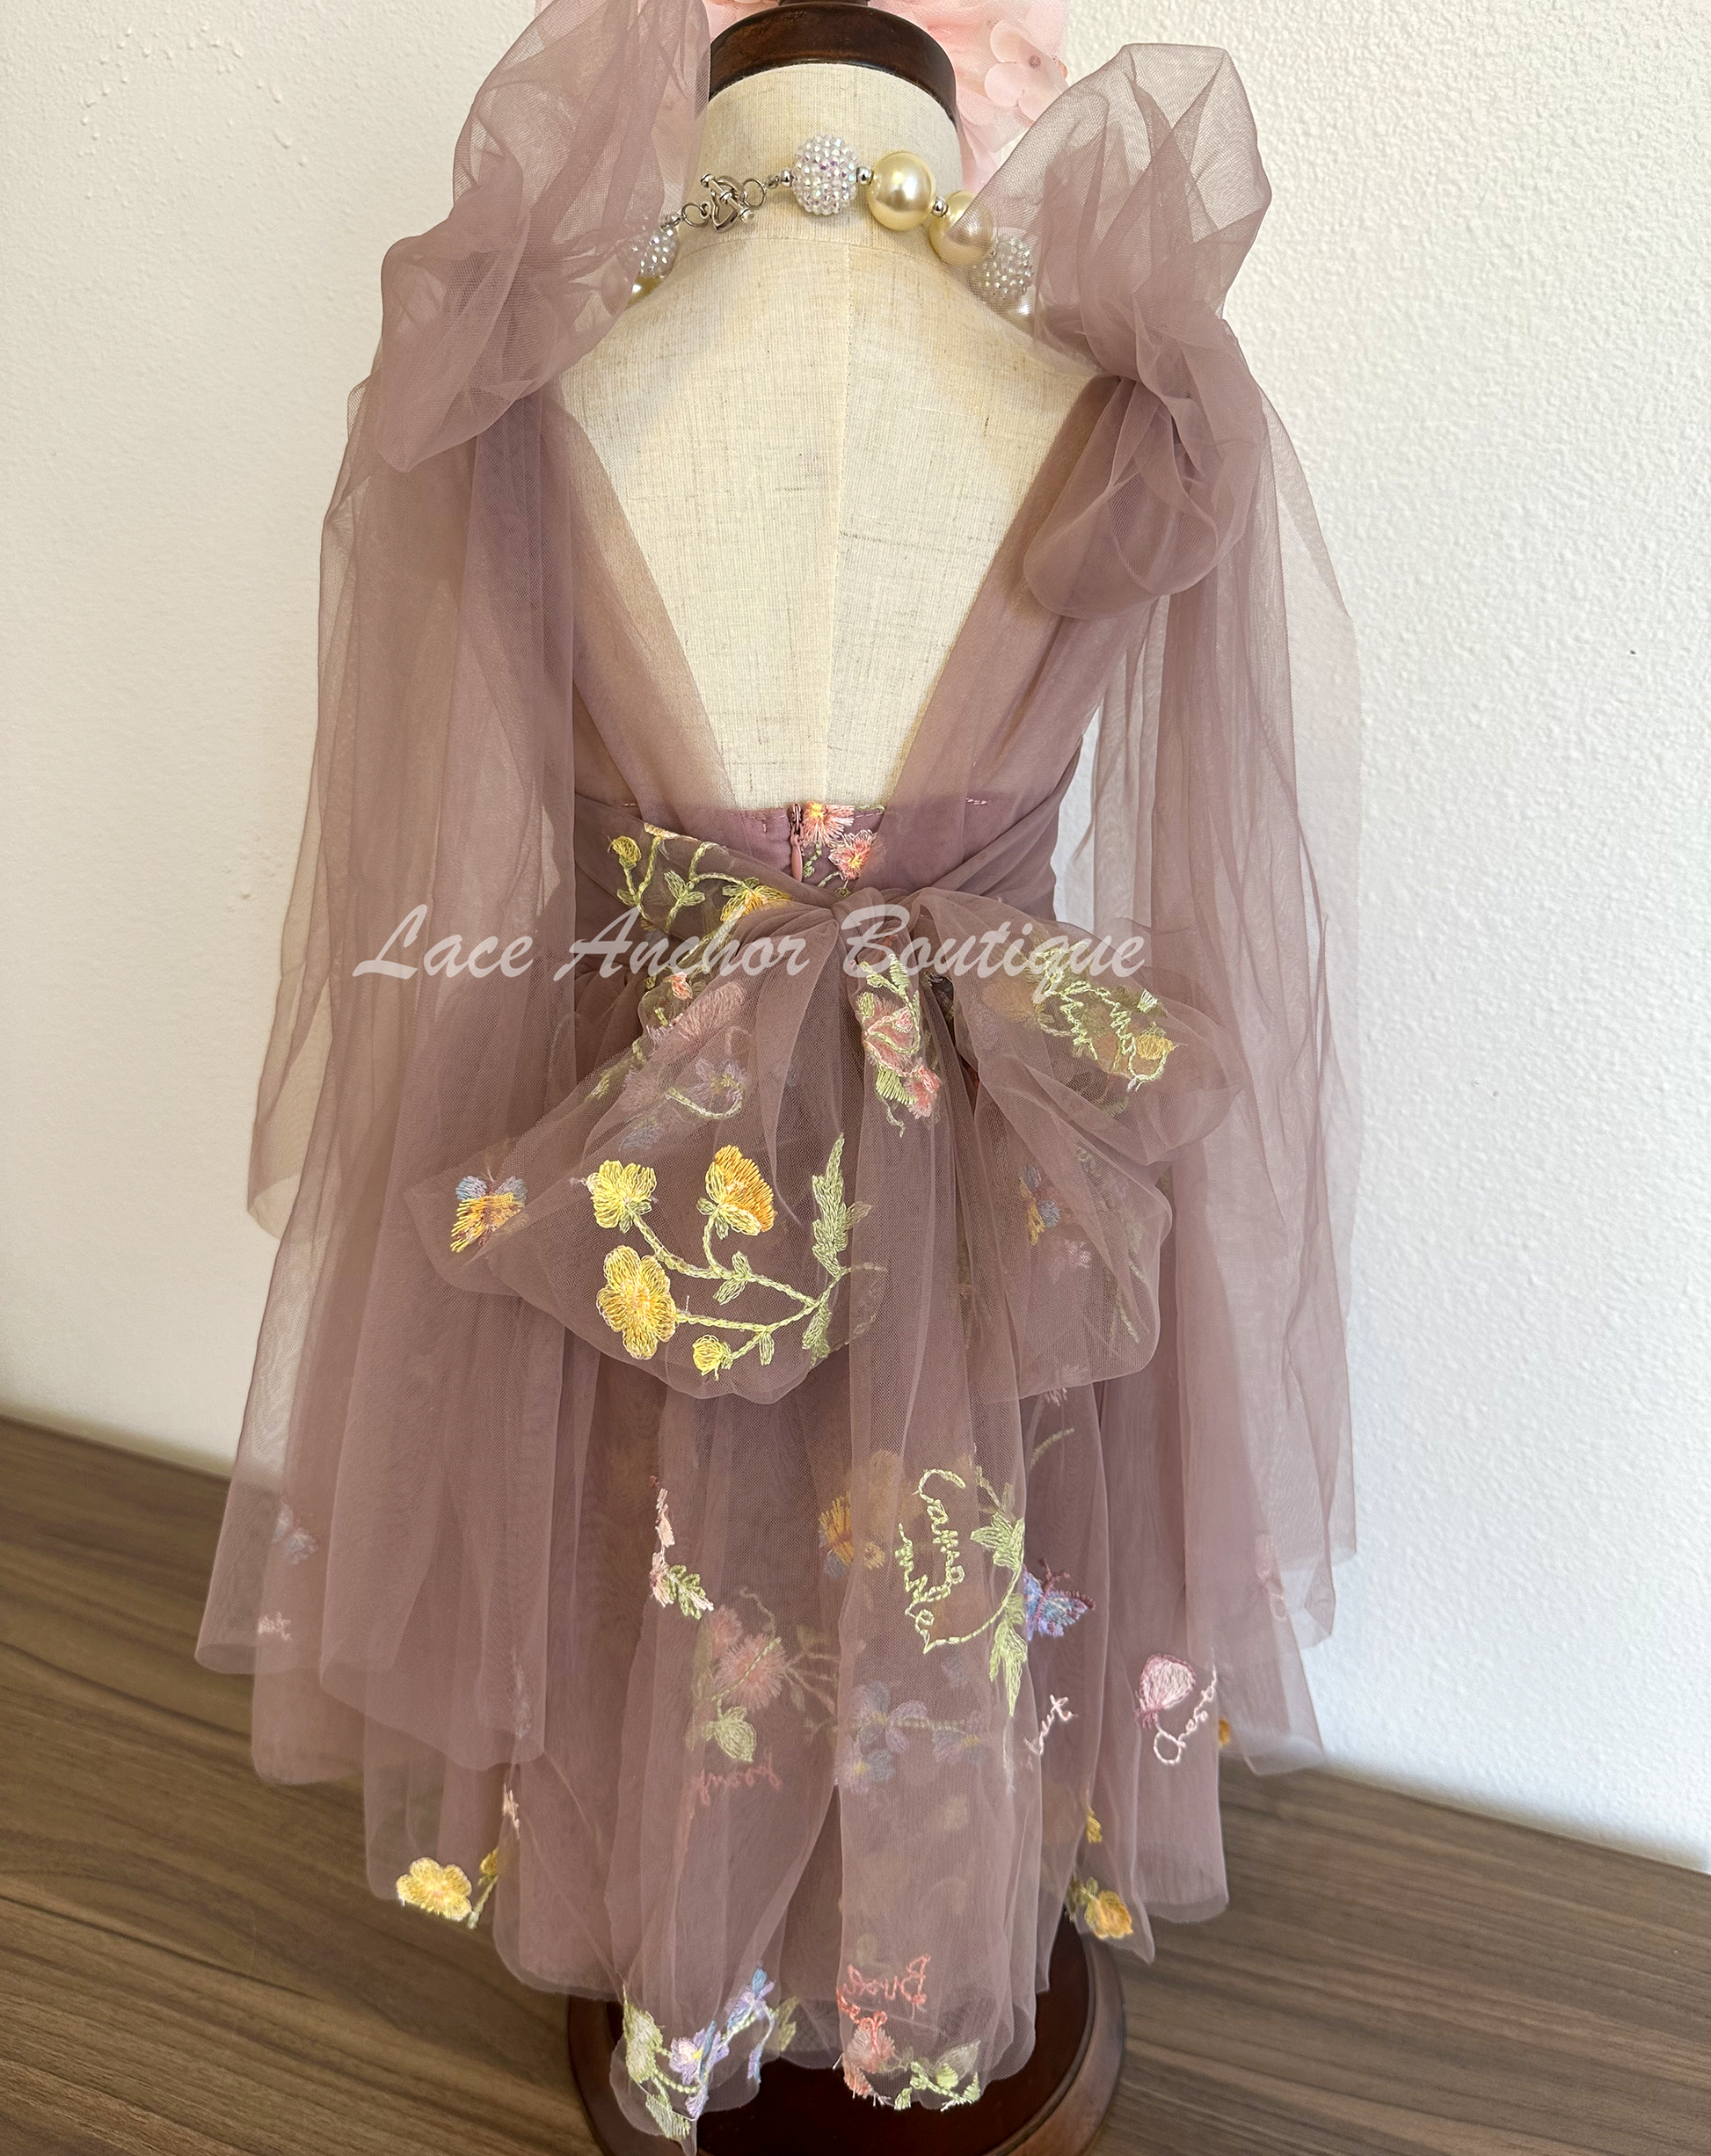 toddler youth puffy tied shoulder flower girl dress with large tied bow tied at waist. Outfits in deep plum purple with emboridered floral print.